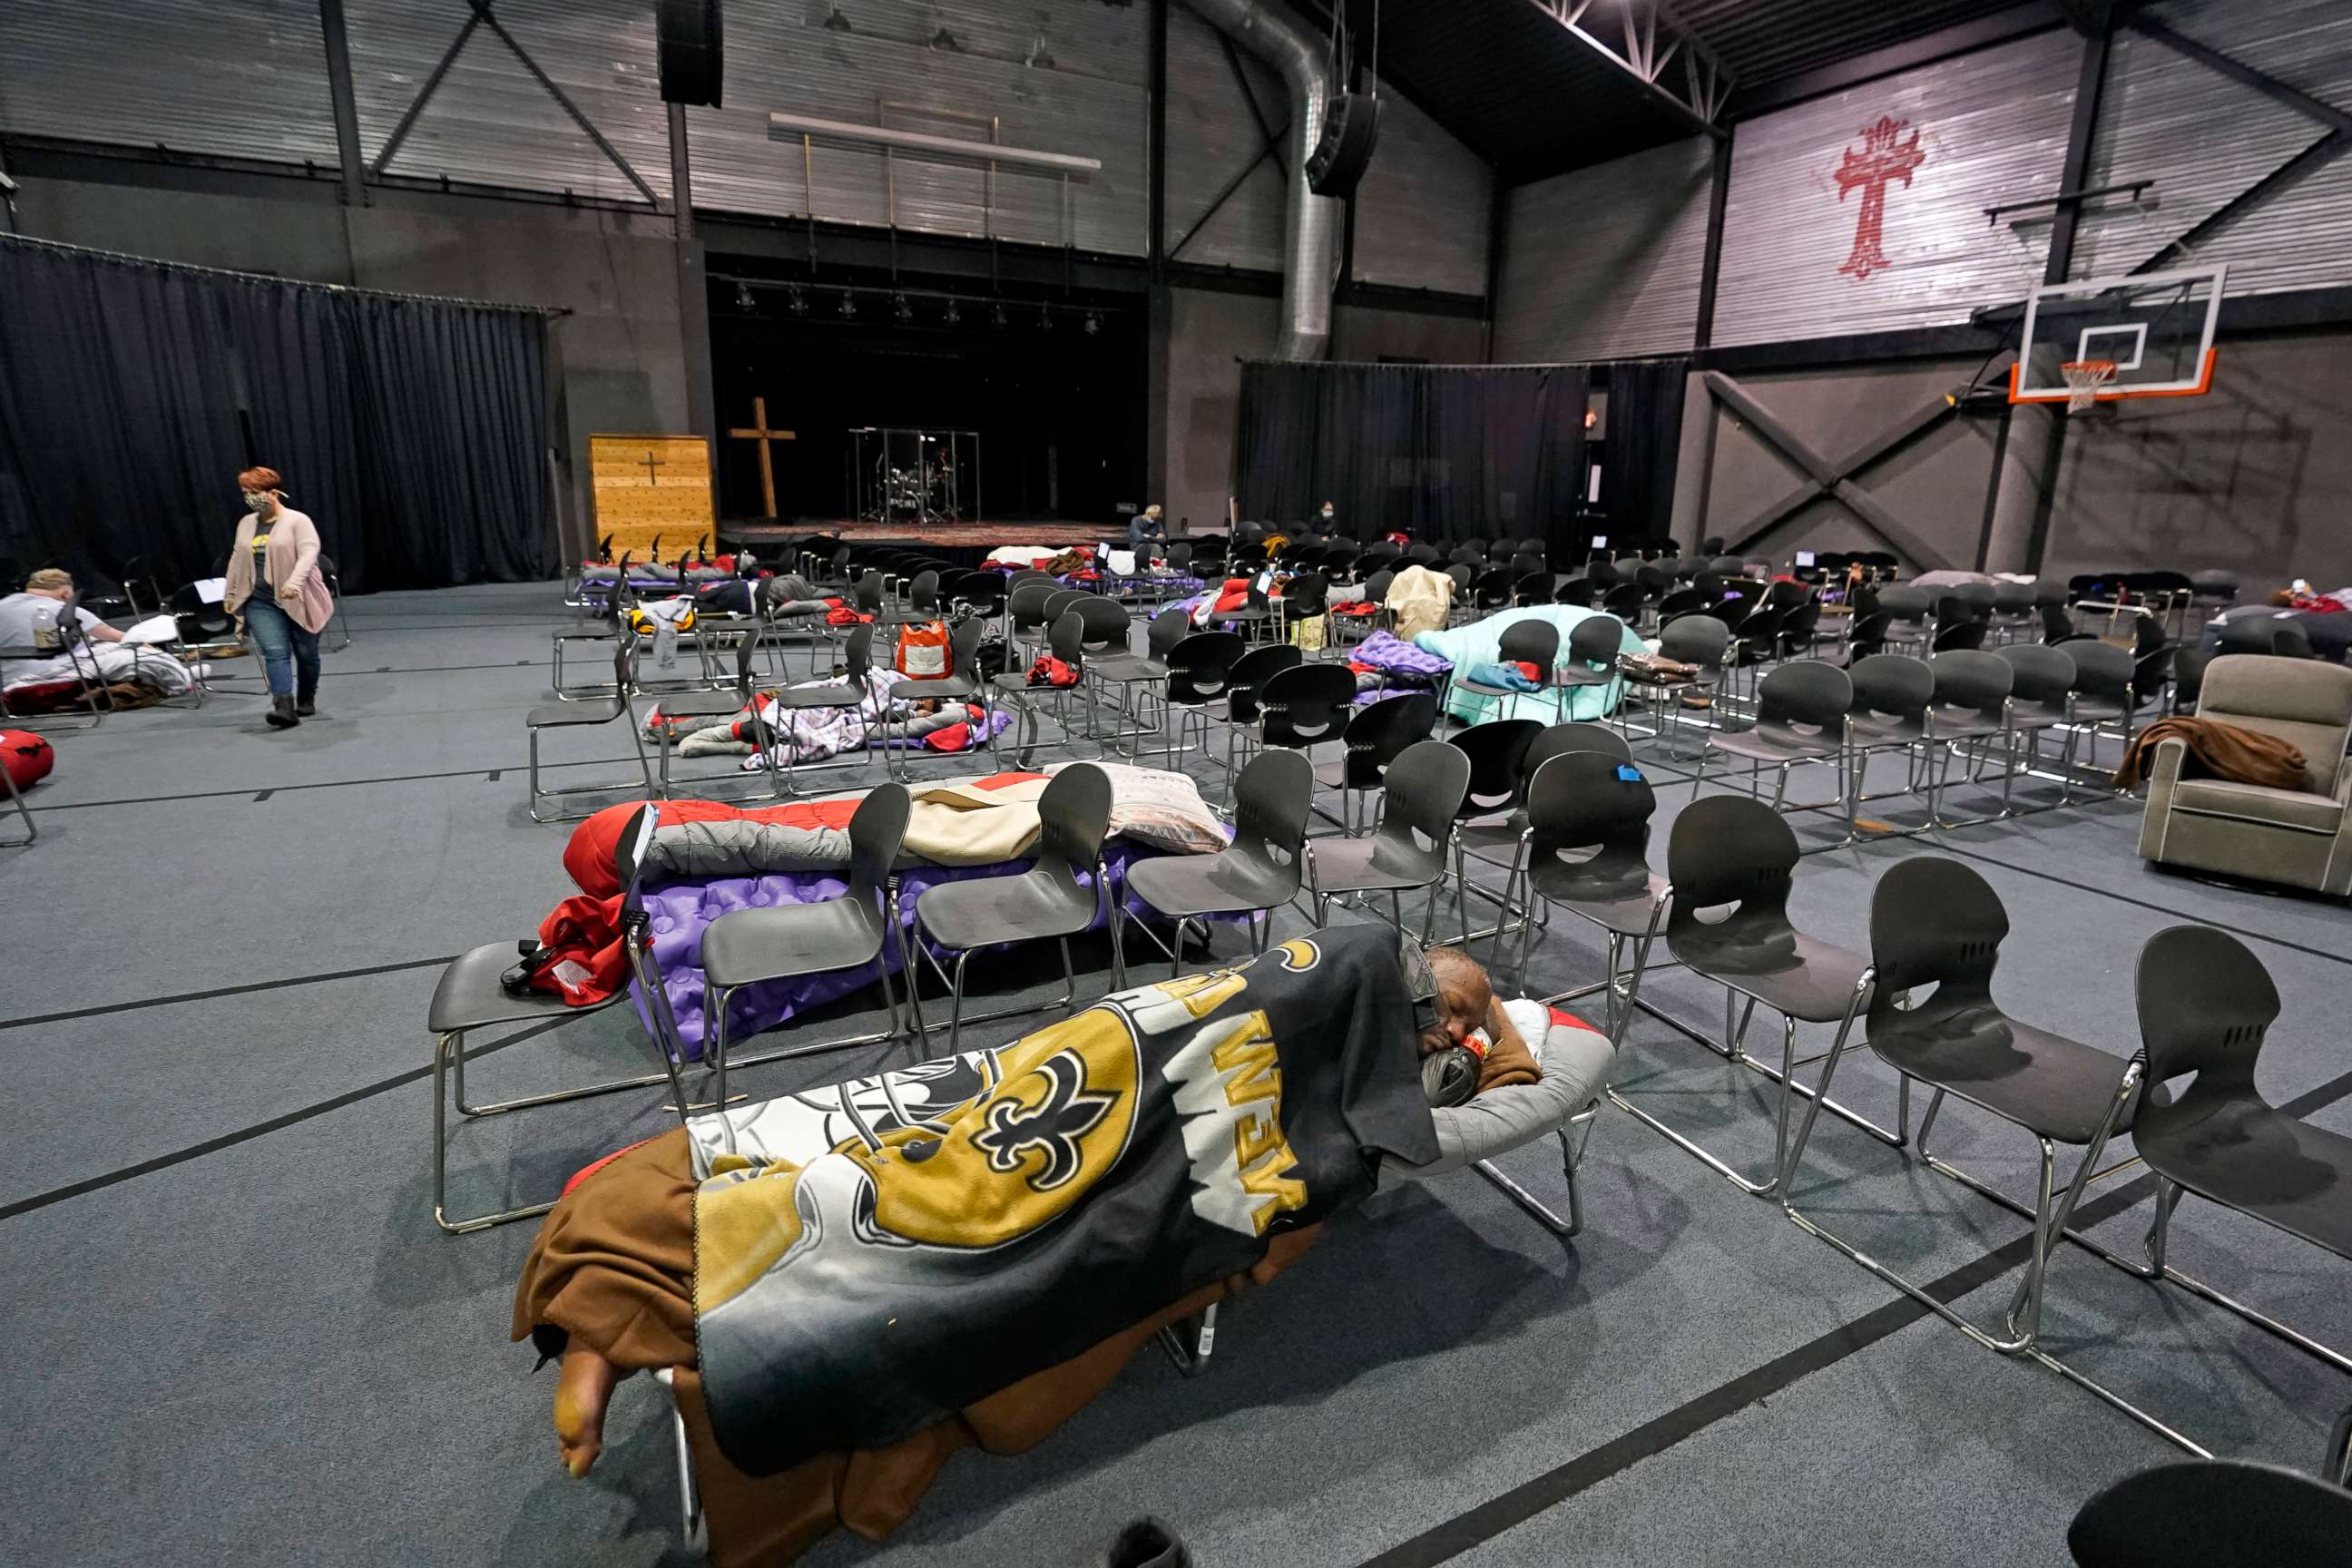 PHOTO: People seeking shelter from below freezing temperatures rest inside a church warming center Tuesday, Feb. 16, 2021, in Houston.